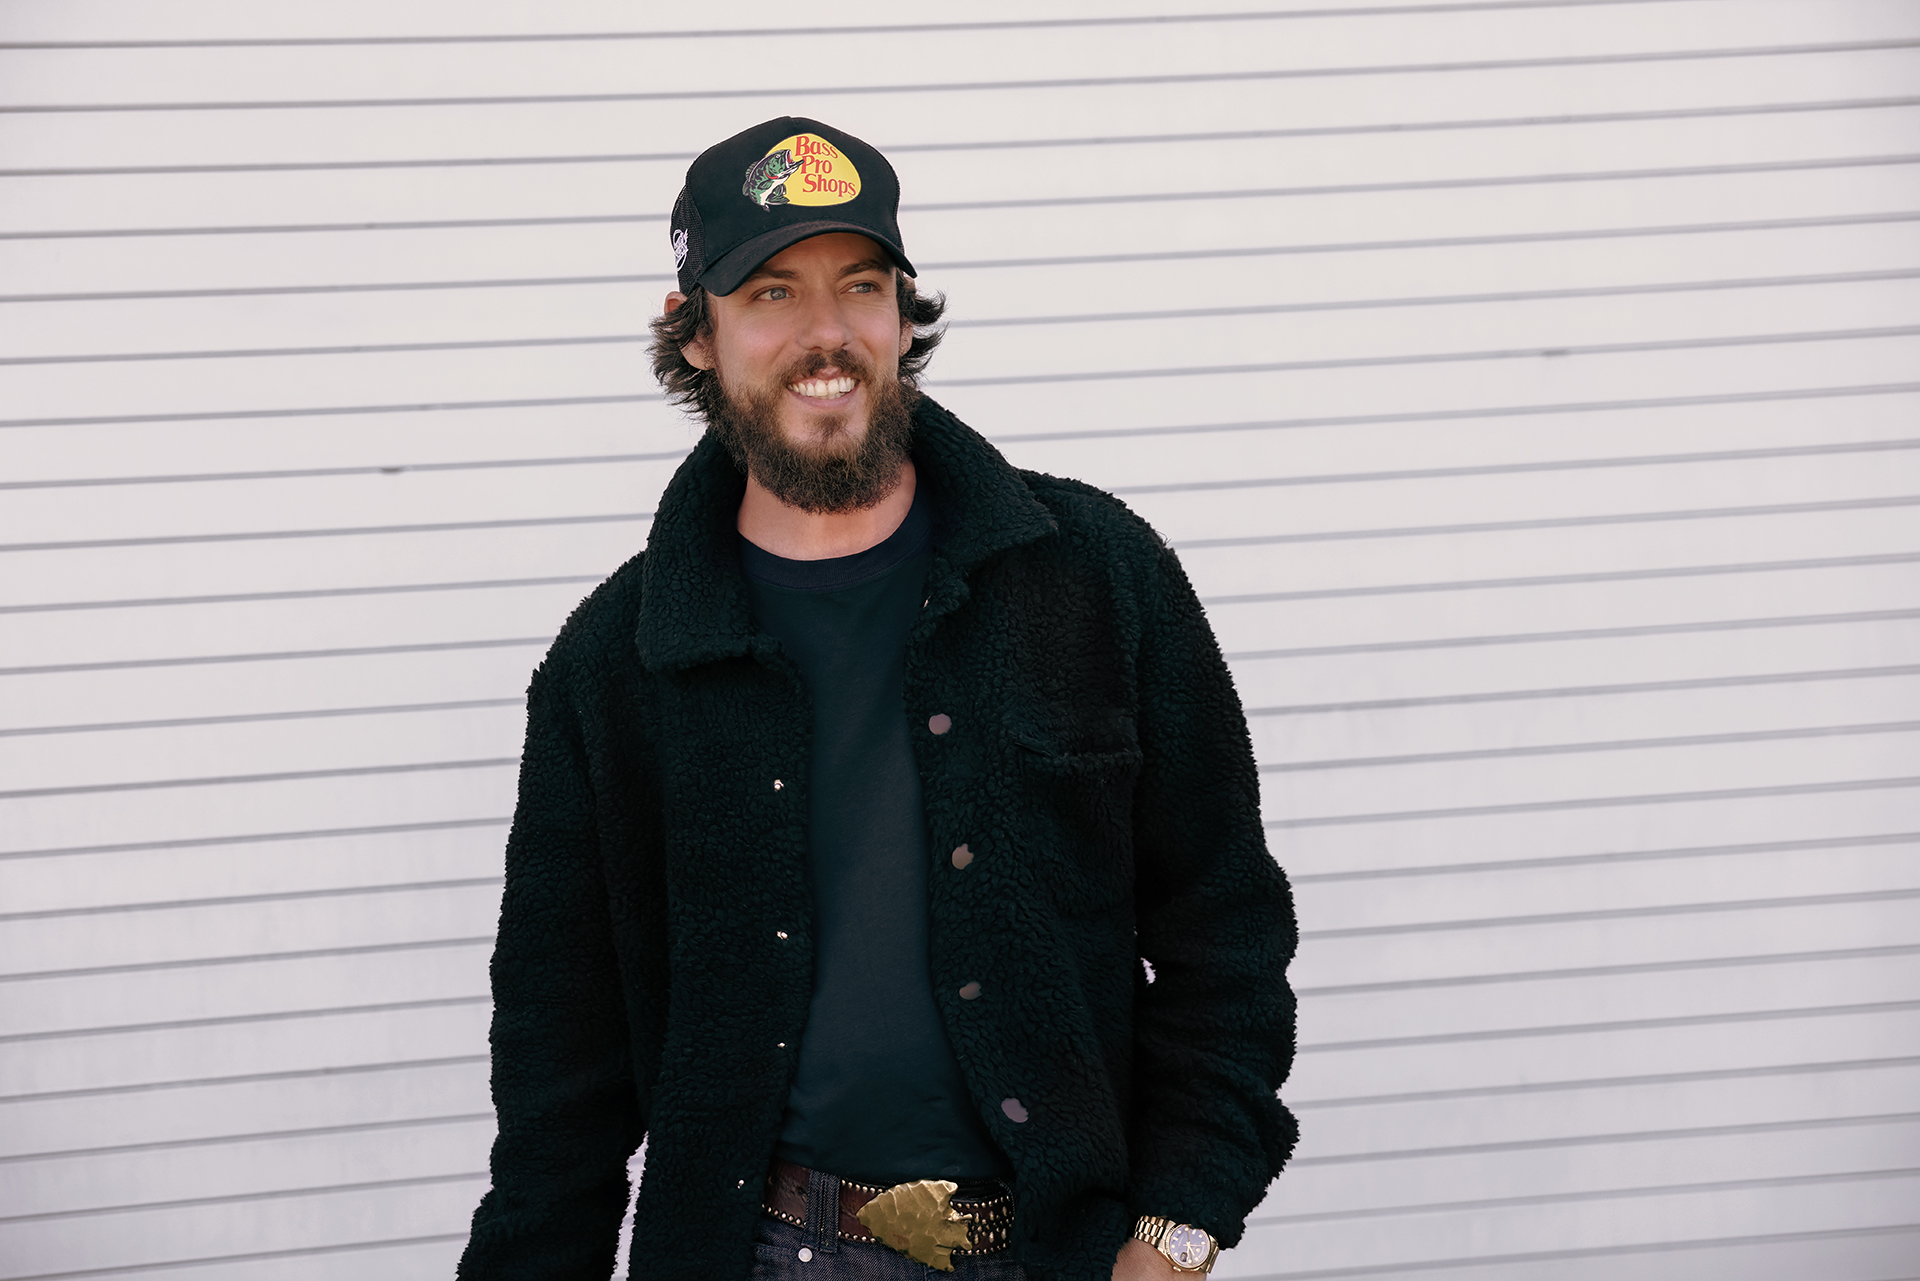 A picture of Chris Janson that is promotional - Chris is posing against a white wall.